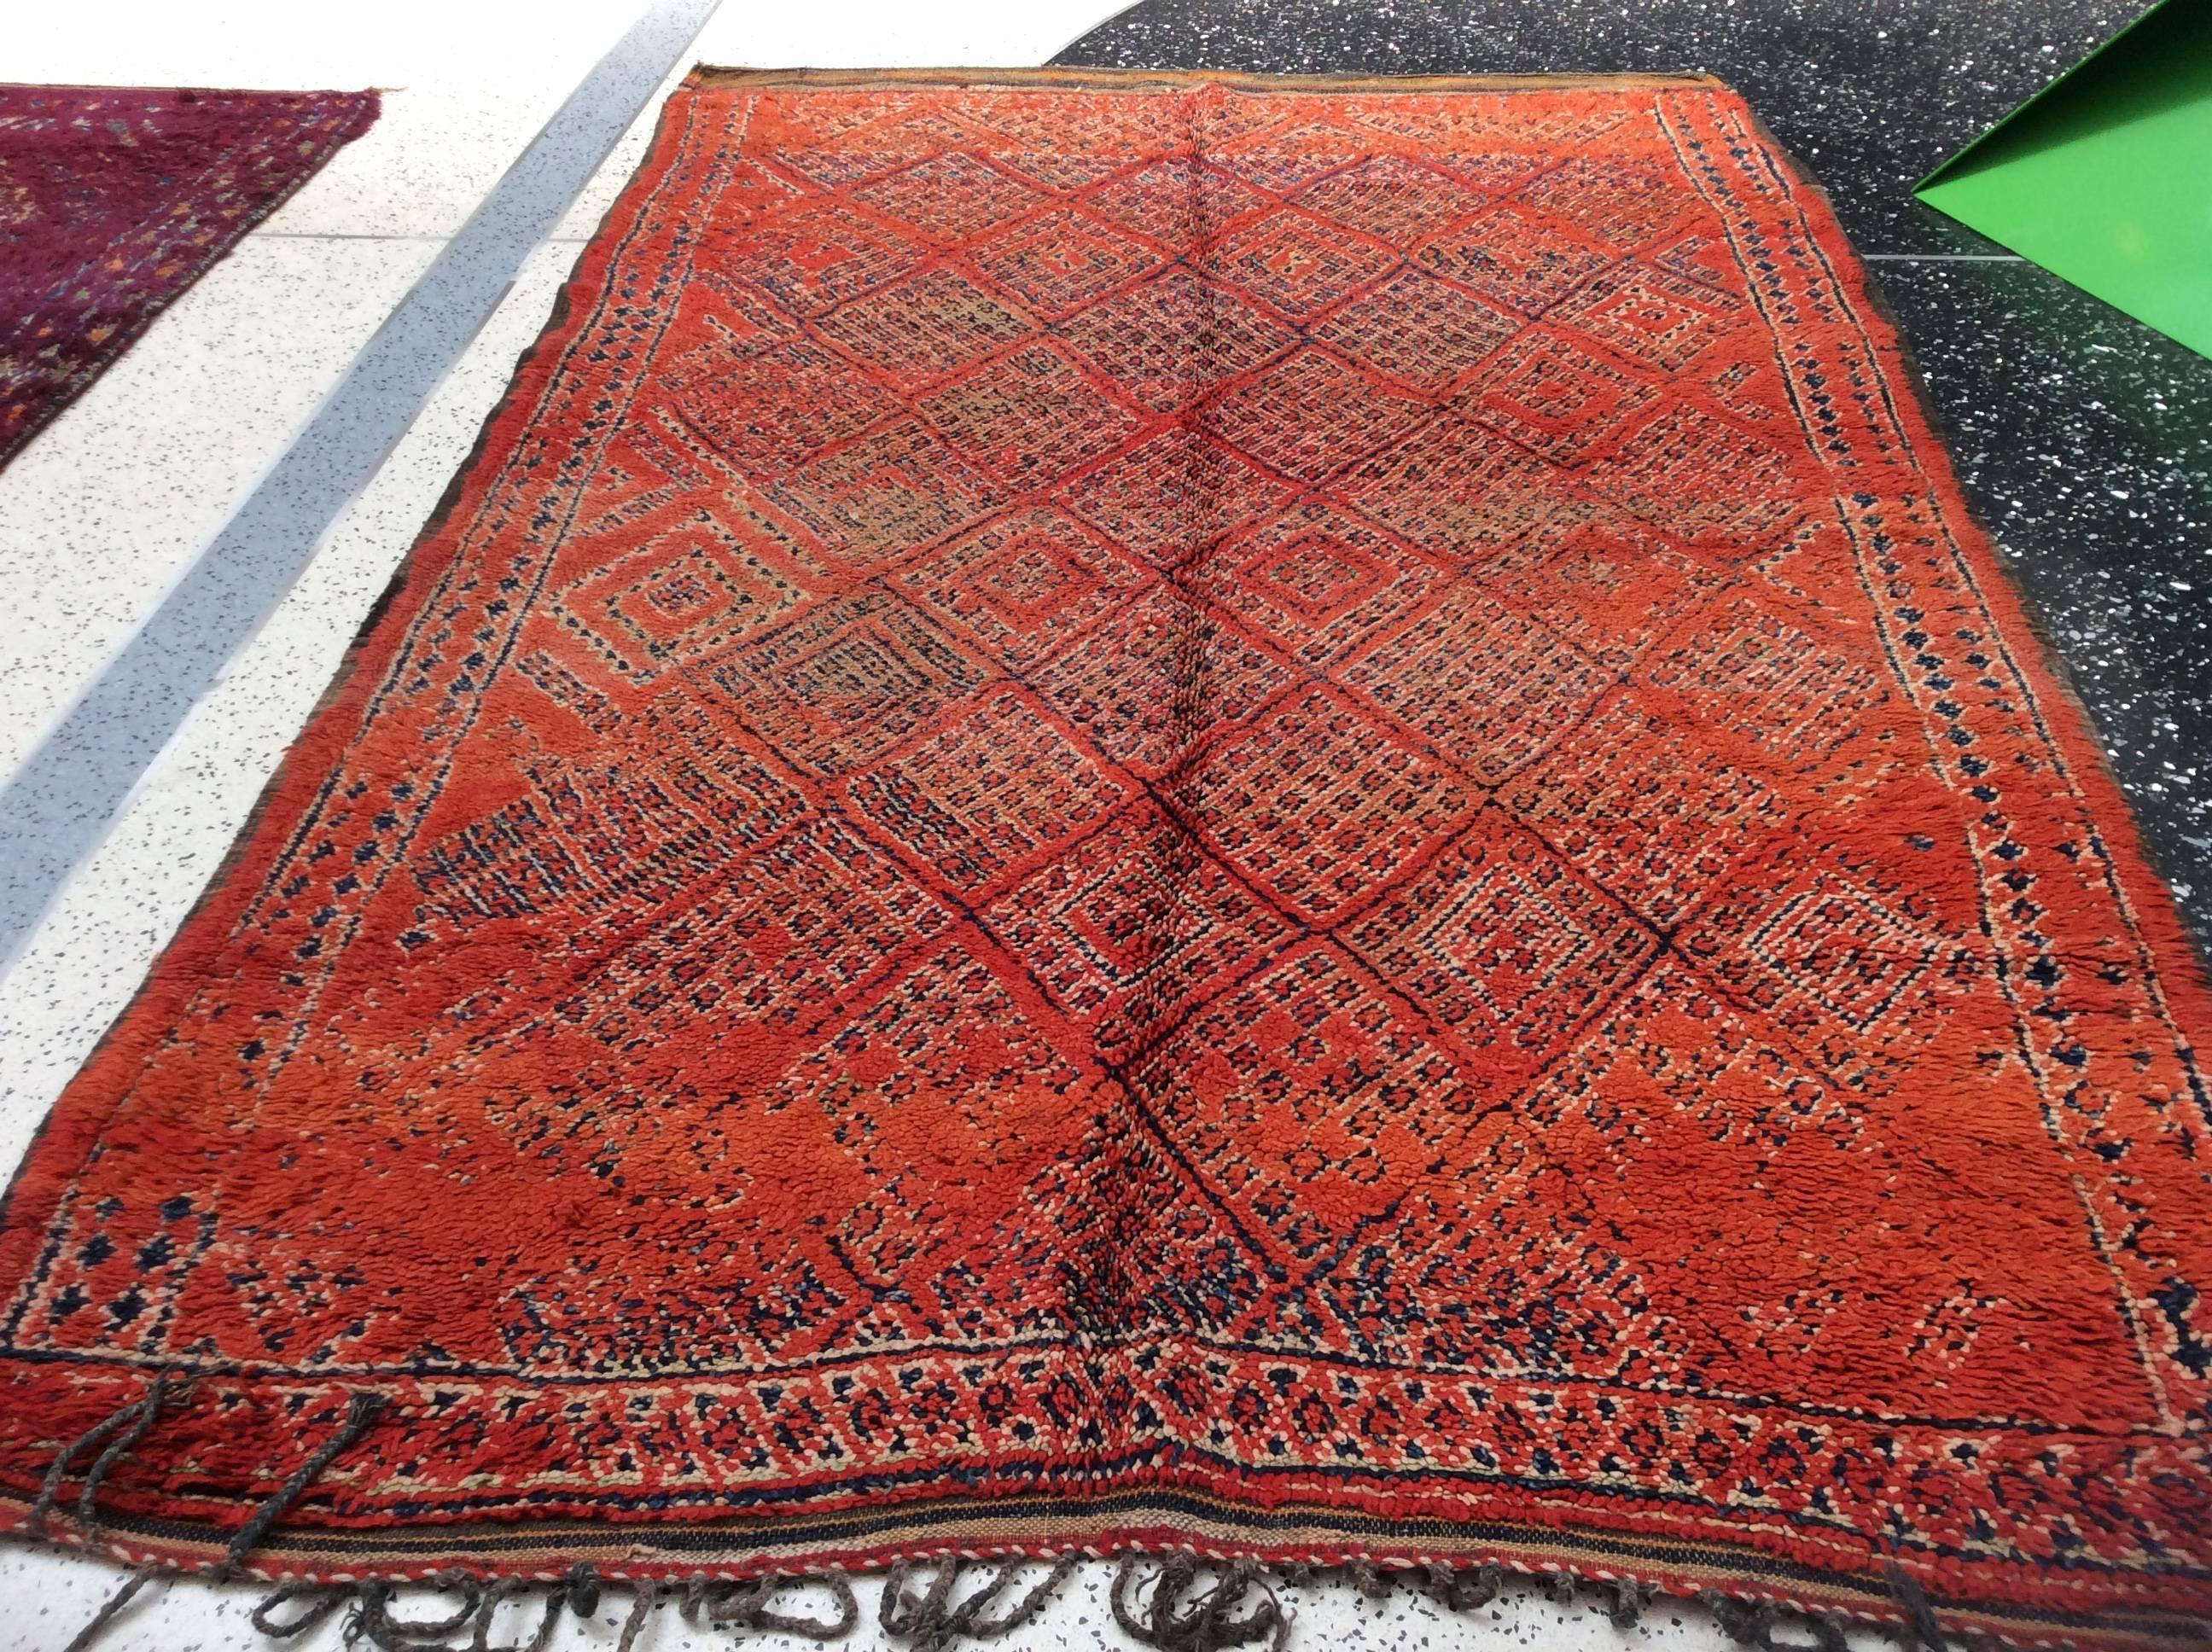 Tribal Moroccan Berber rug

A weaving technique that has been passed down from generations to generations makes Moroccan Berber rug such a Fine addition to your collection. It is made of luxurious hand-spun wool by the high atlas tribe, no 2